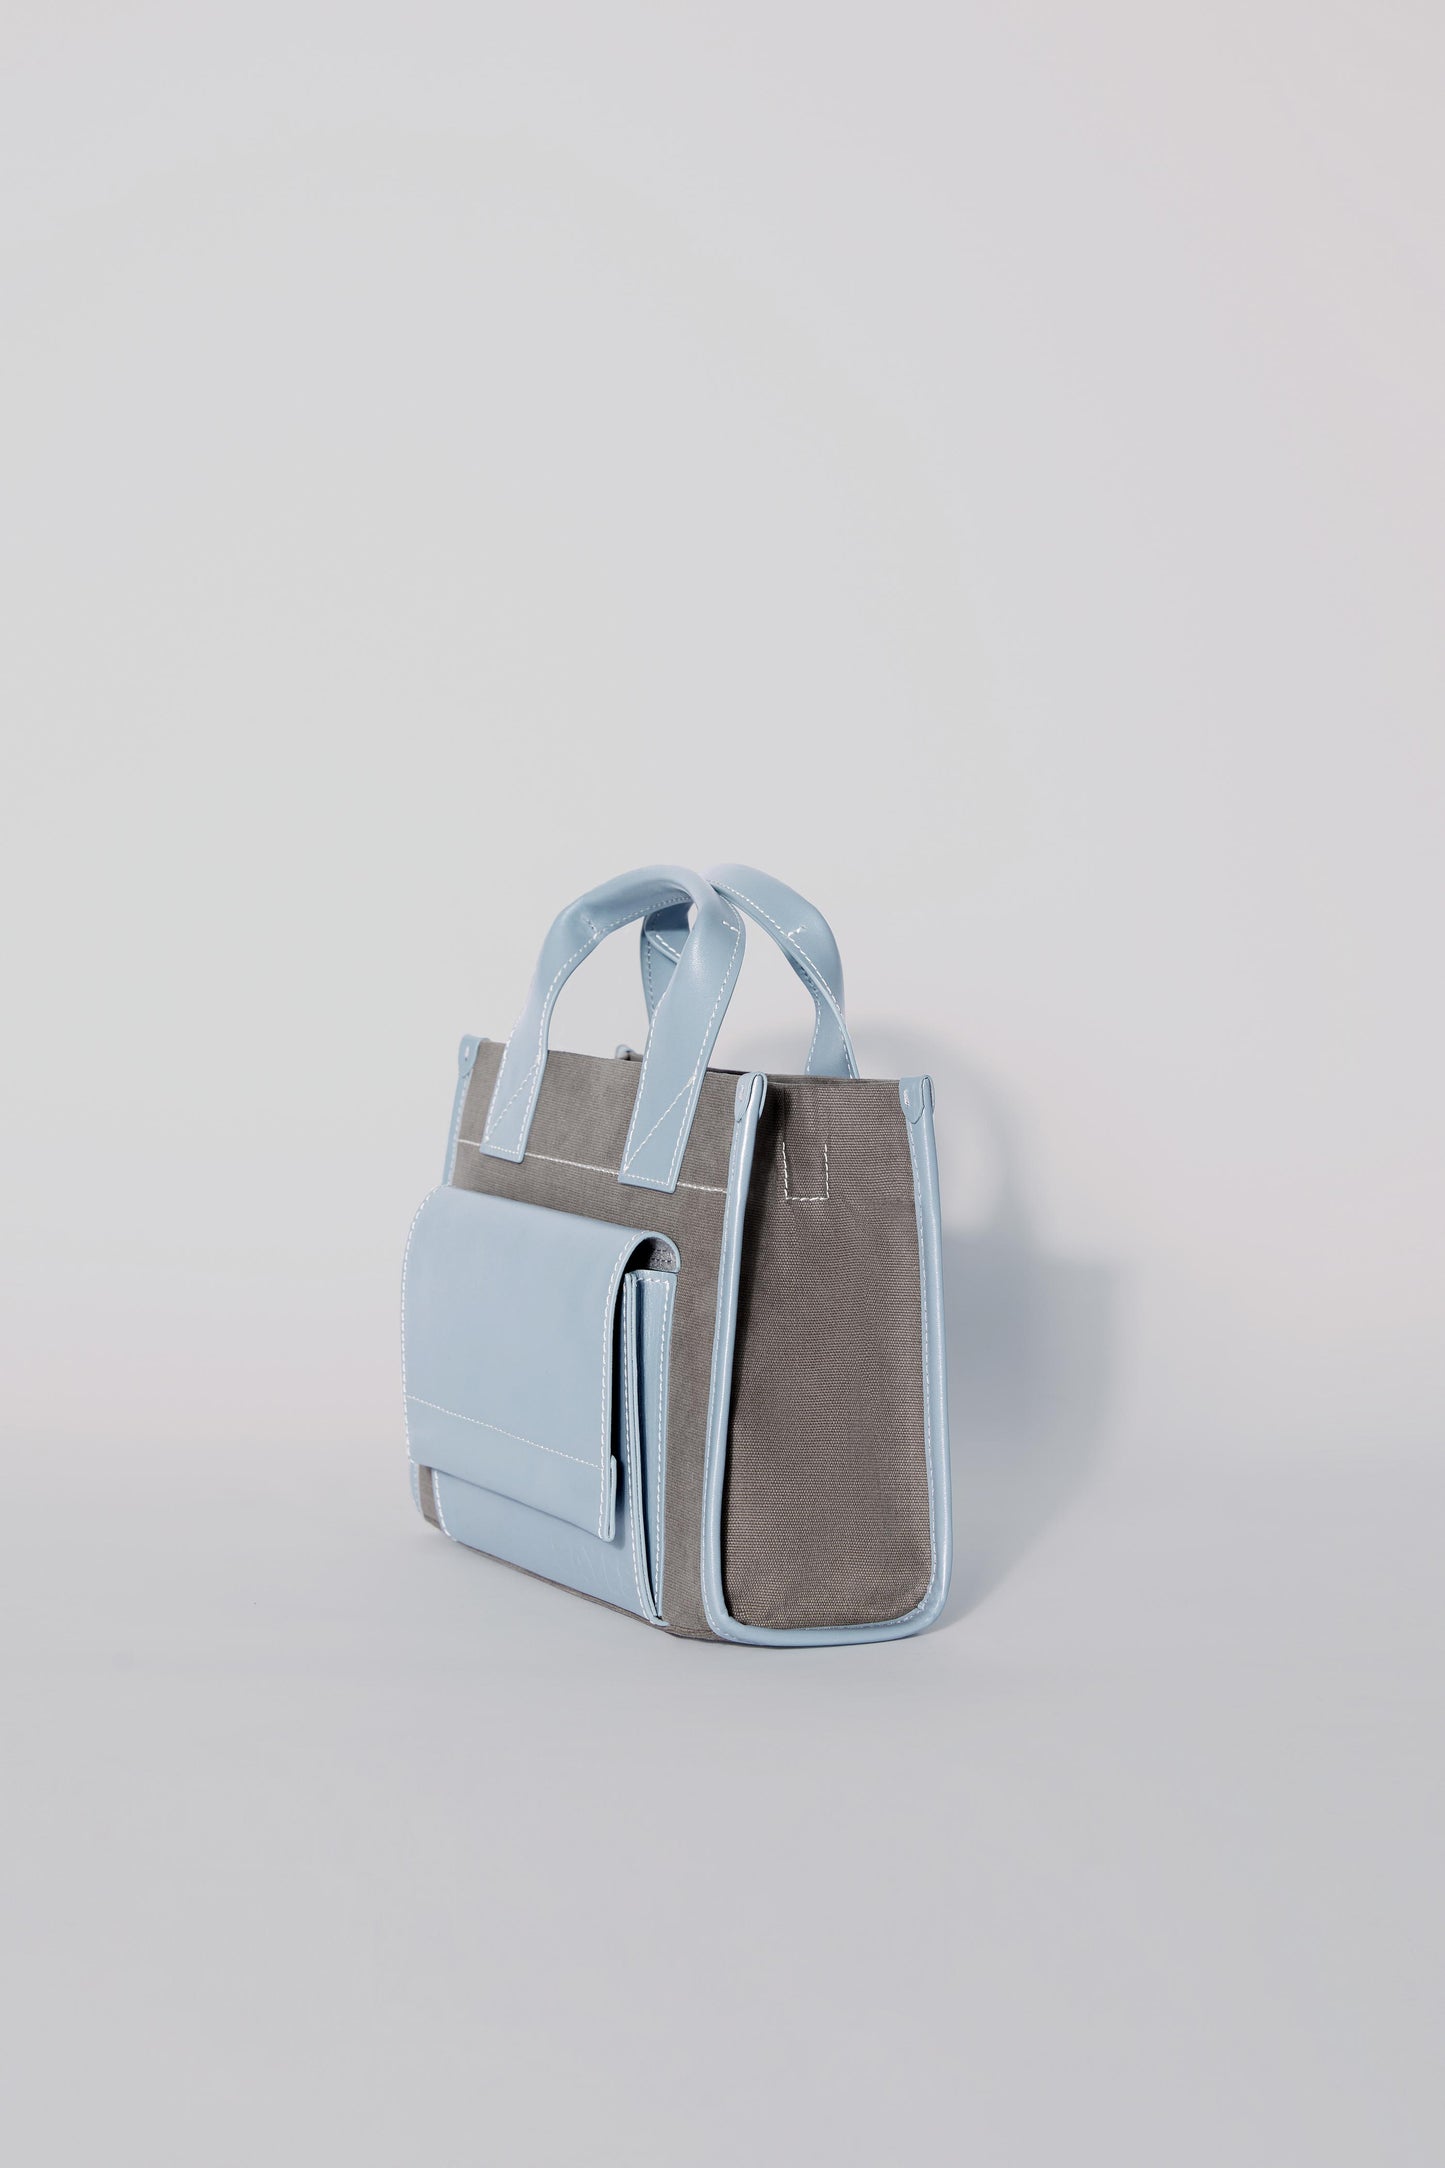 STITCHED POCKET MINI TOTE BAG IN MINK AND BLUE